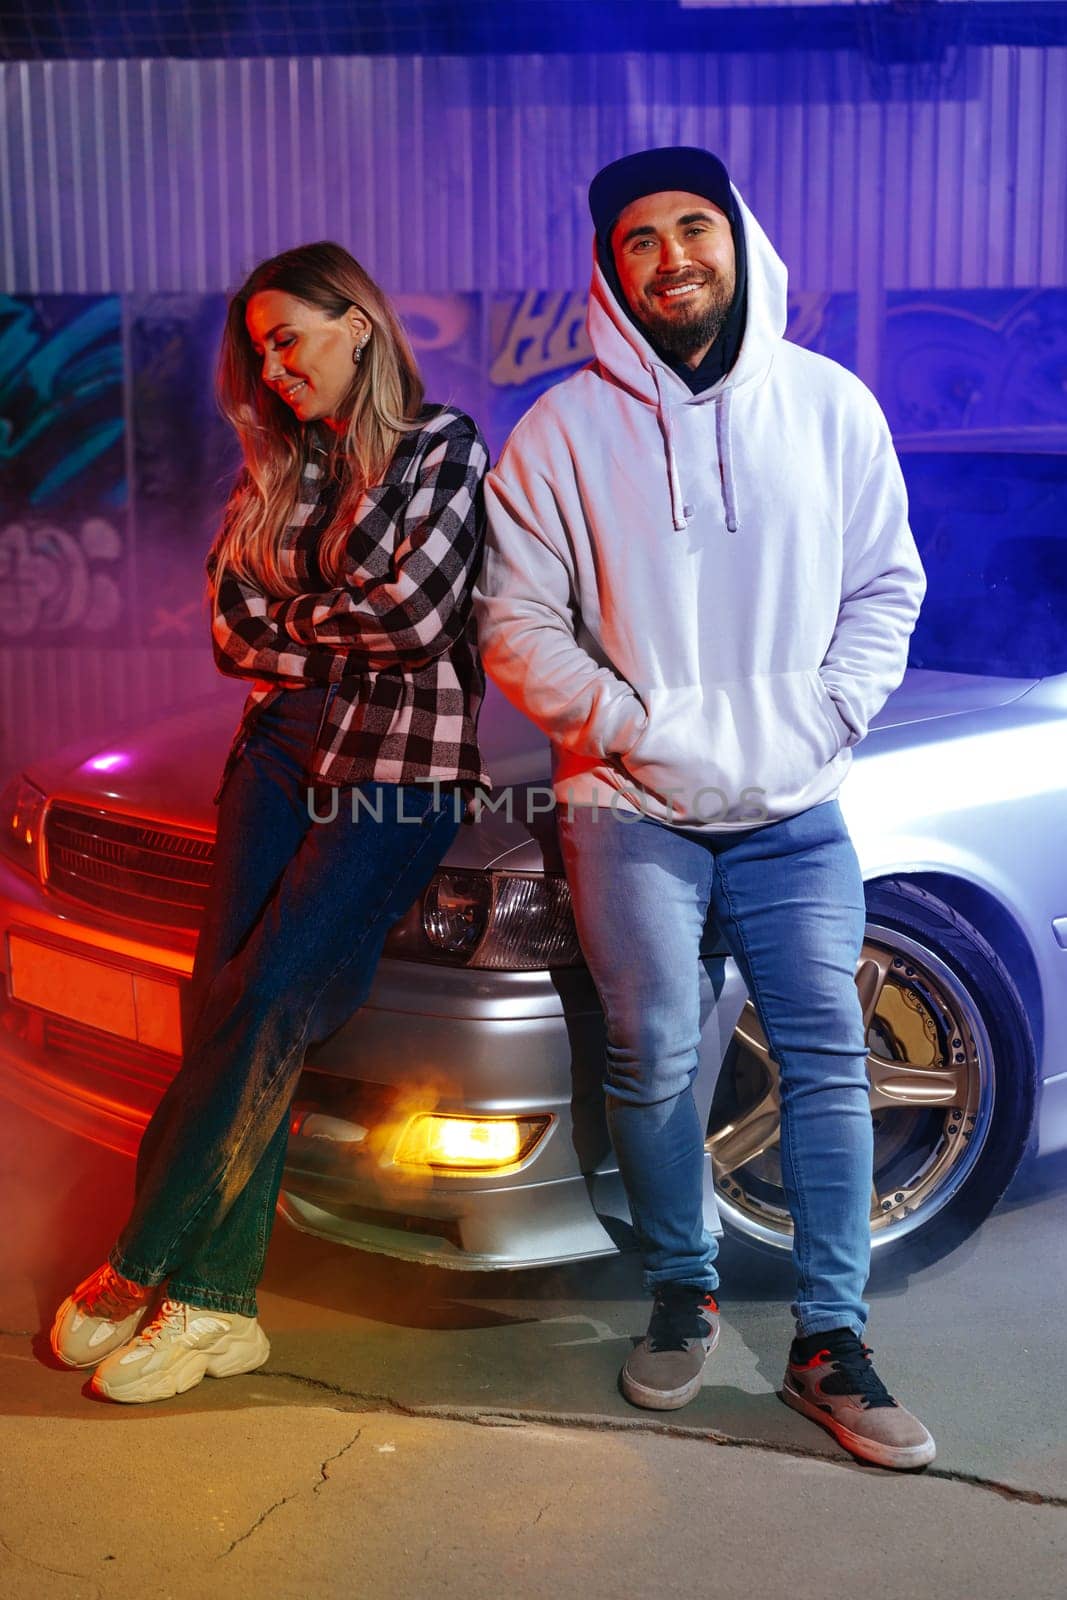 Smiling couple standing near sport car over night city background by Fabrikasimf